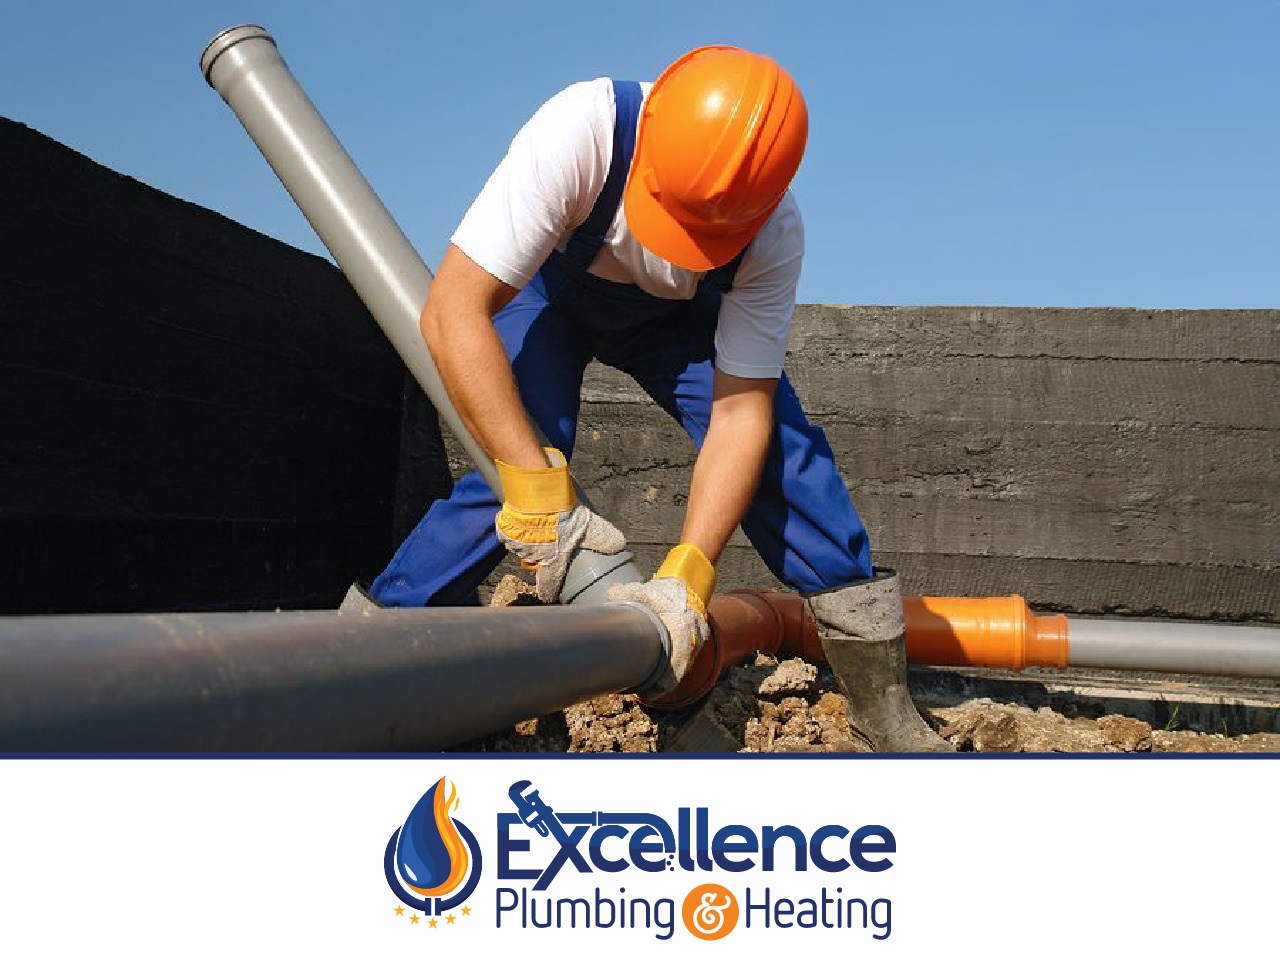 Excellence Plumbing Service Union Offers Comprehensive Heating and Plumbing Solutions for New Jersey Residents